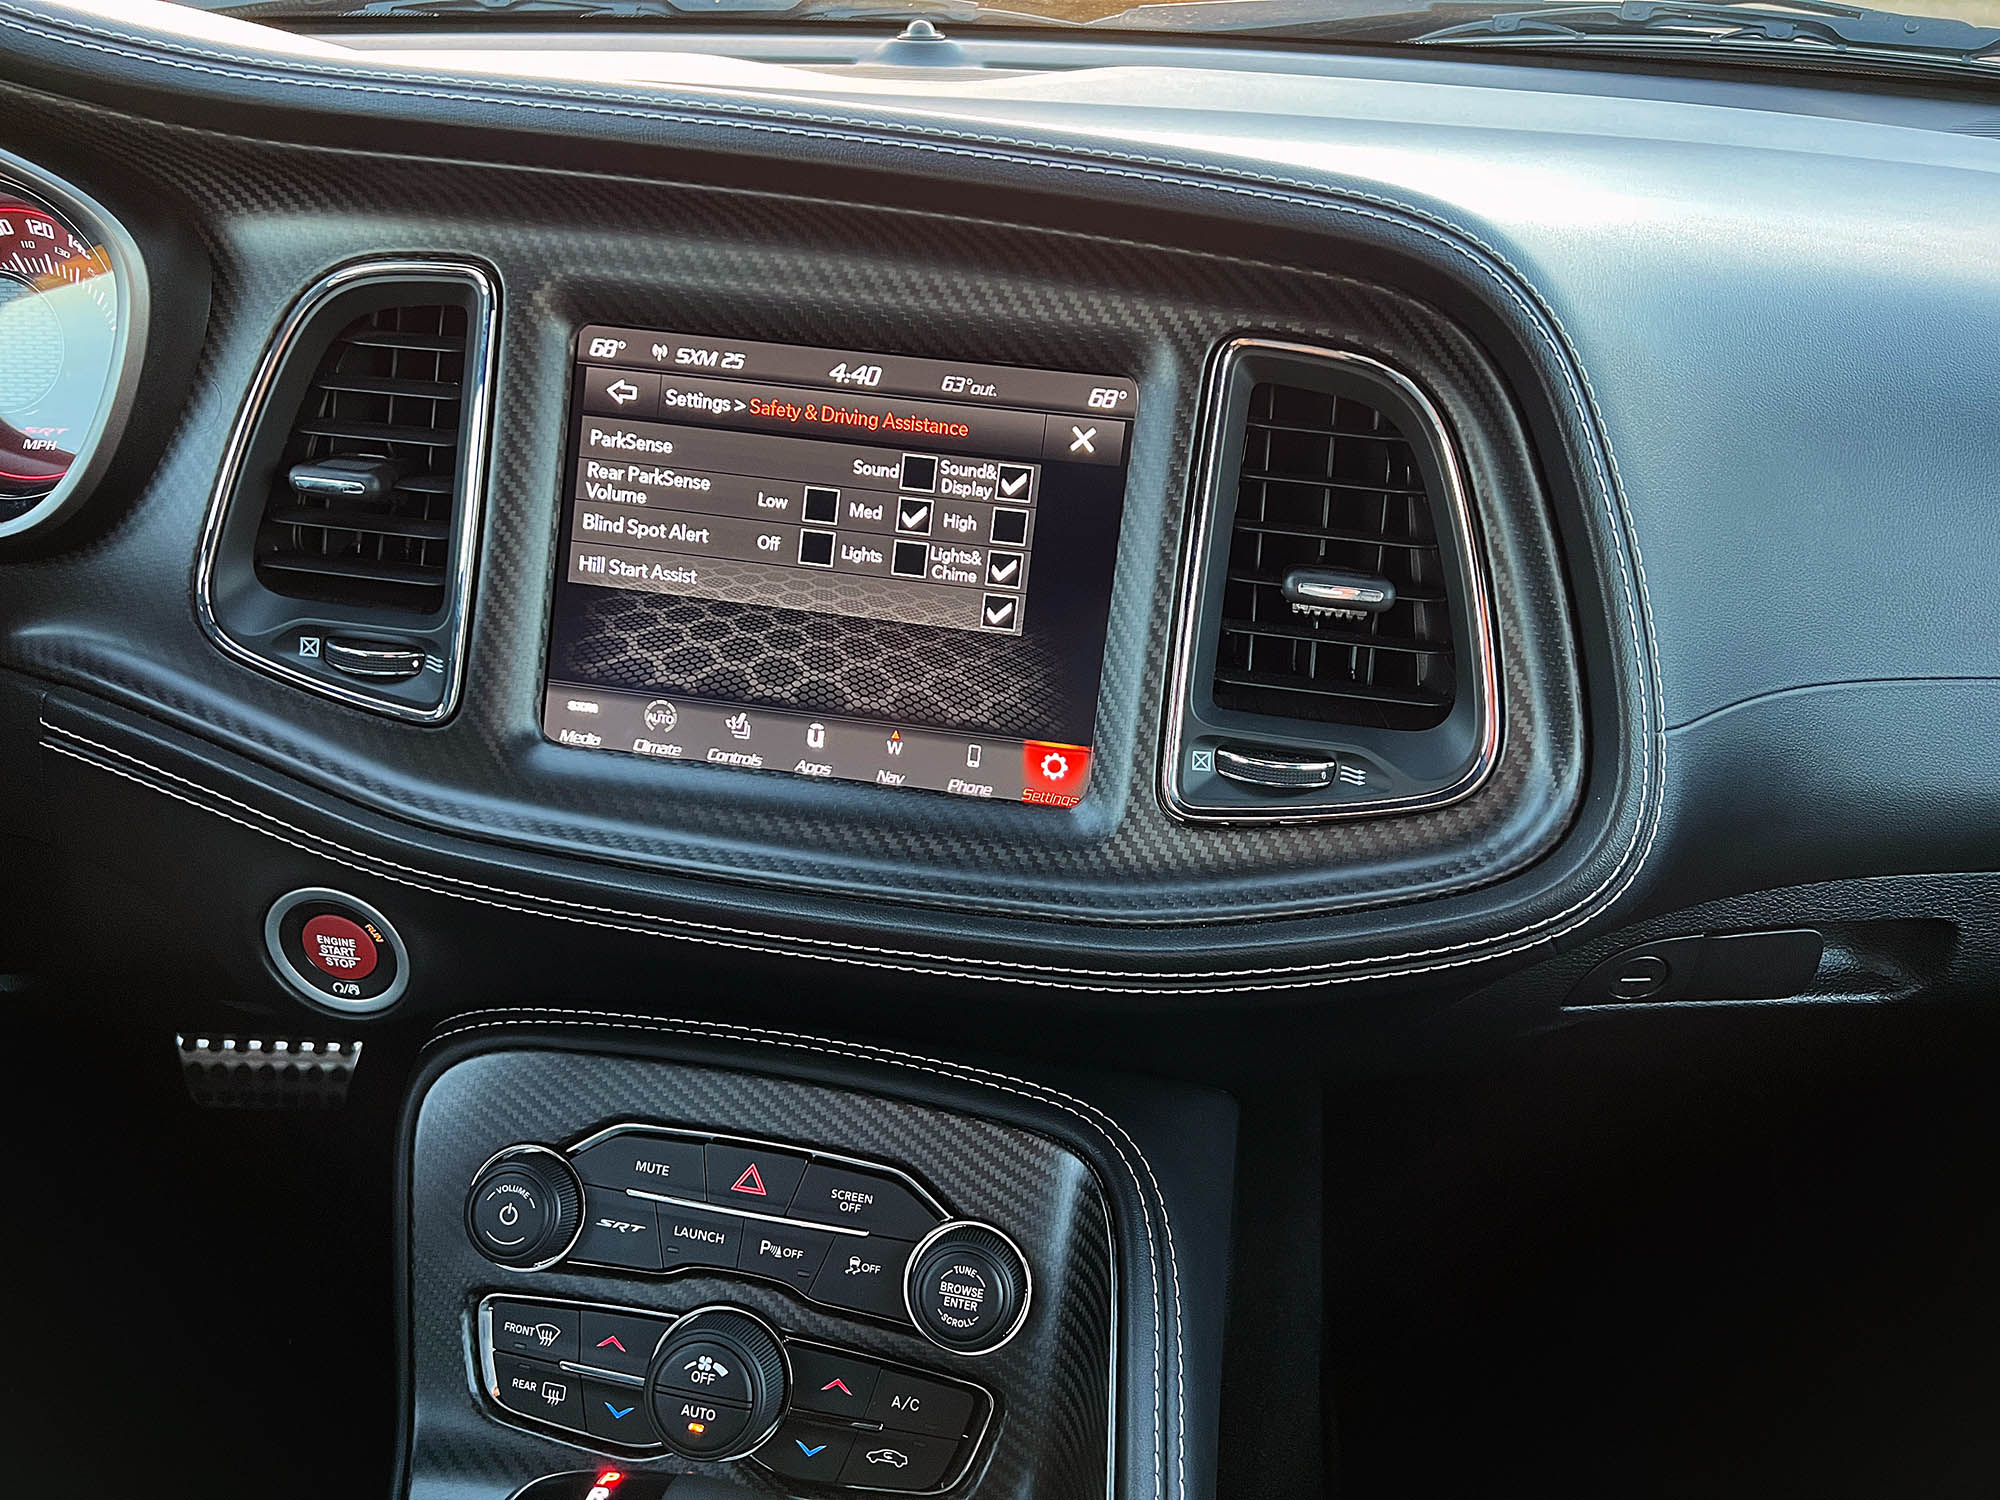 2023 Dodge Challenger Black Ghost safety and driving assistance settings screen.